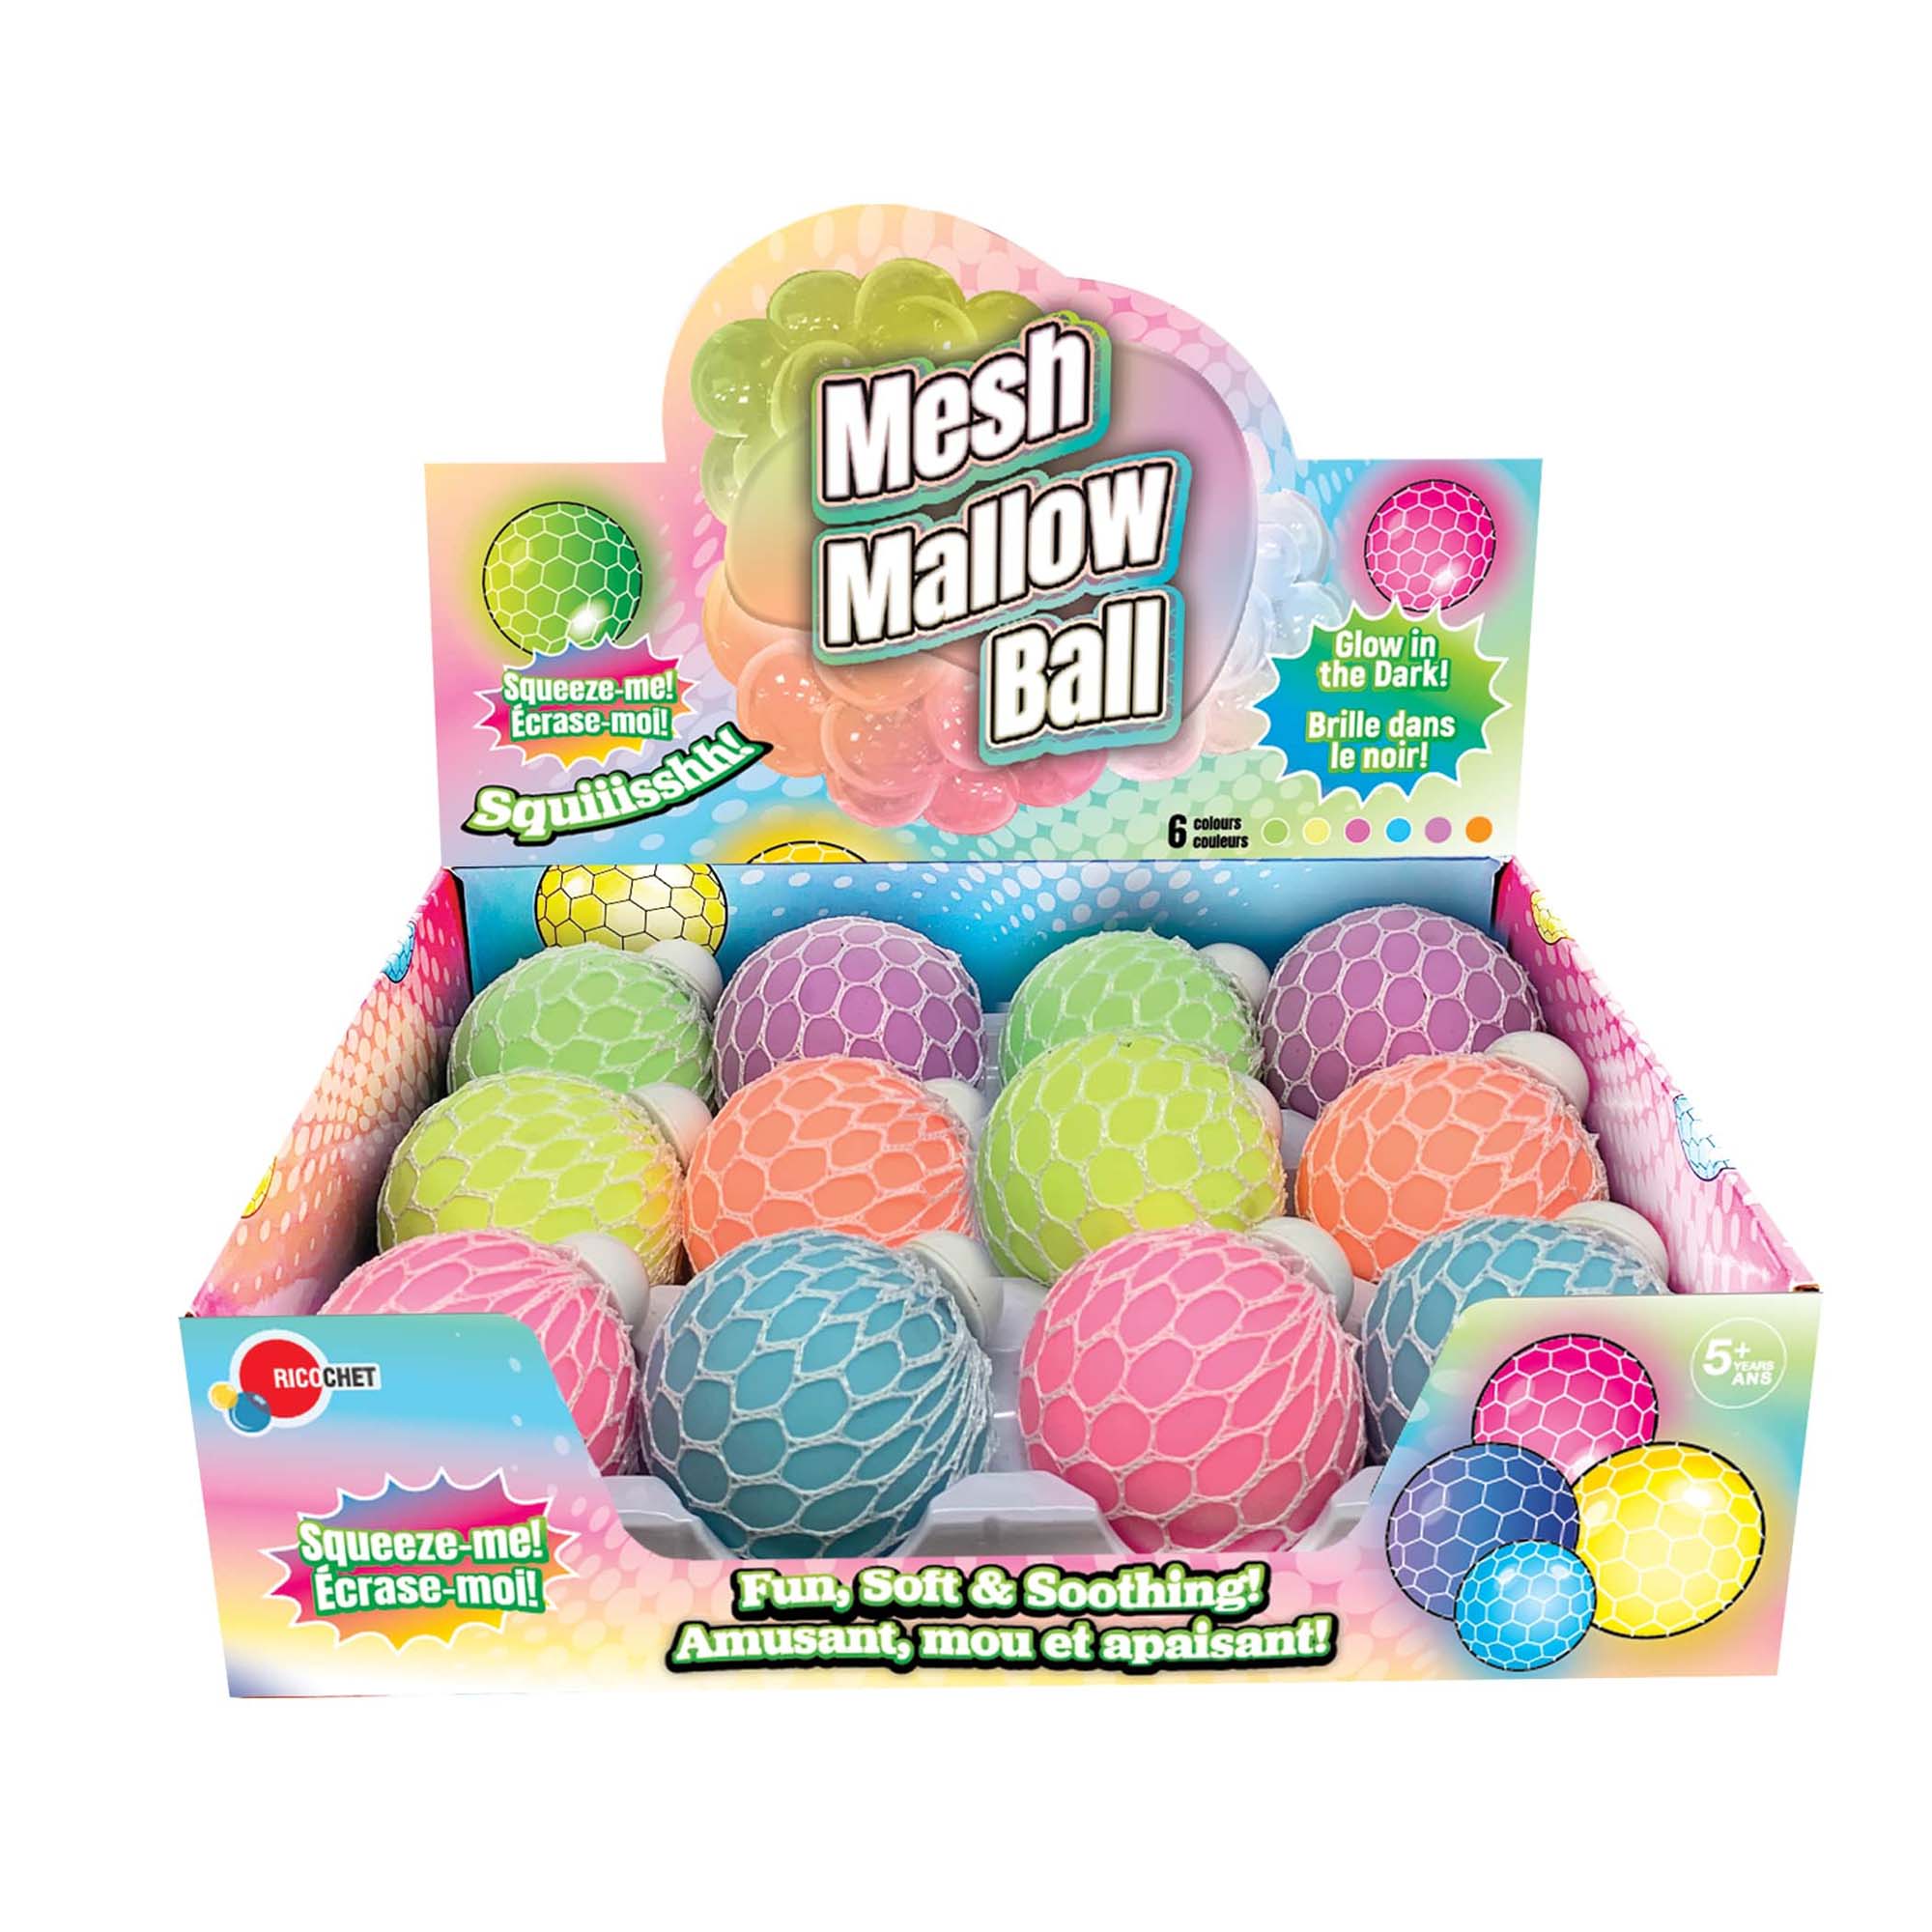 Meshmallow Glow in the Dark Ball, Assortment, 1 Count